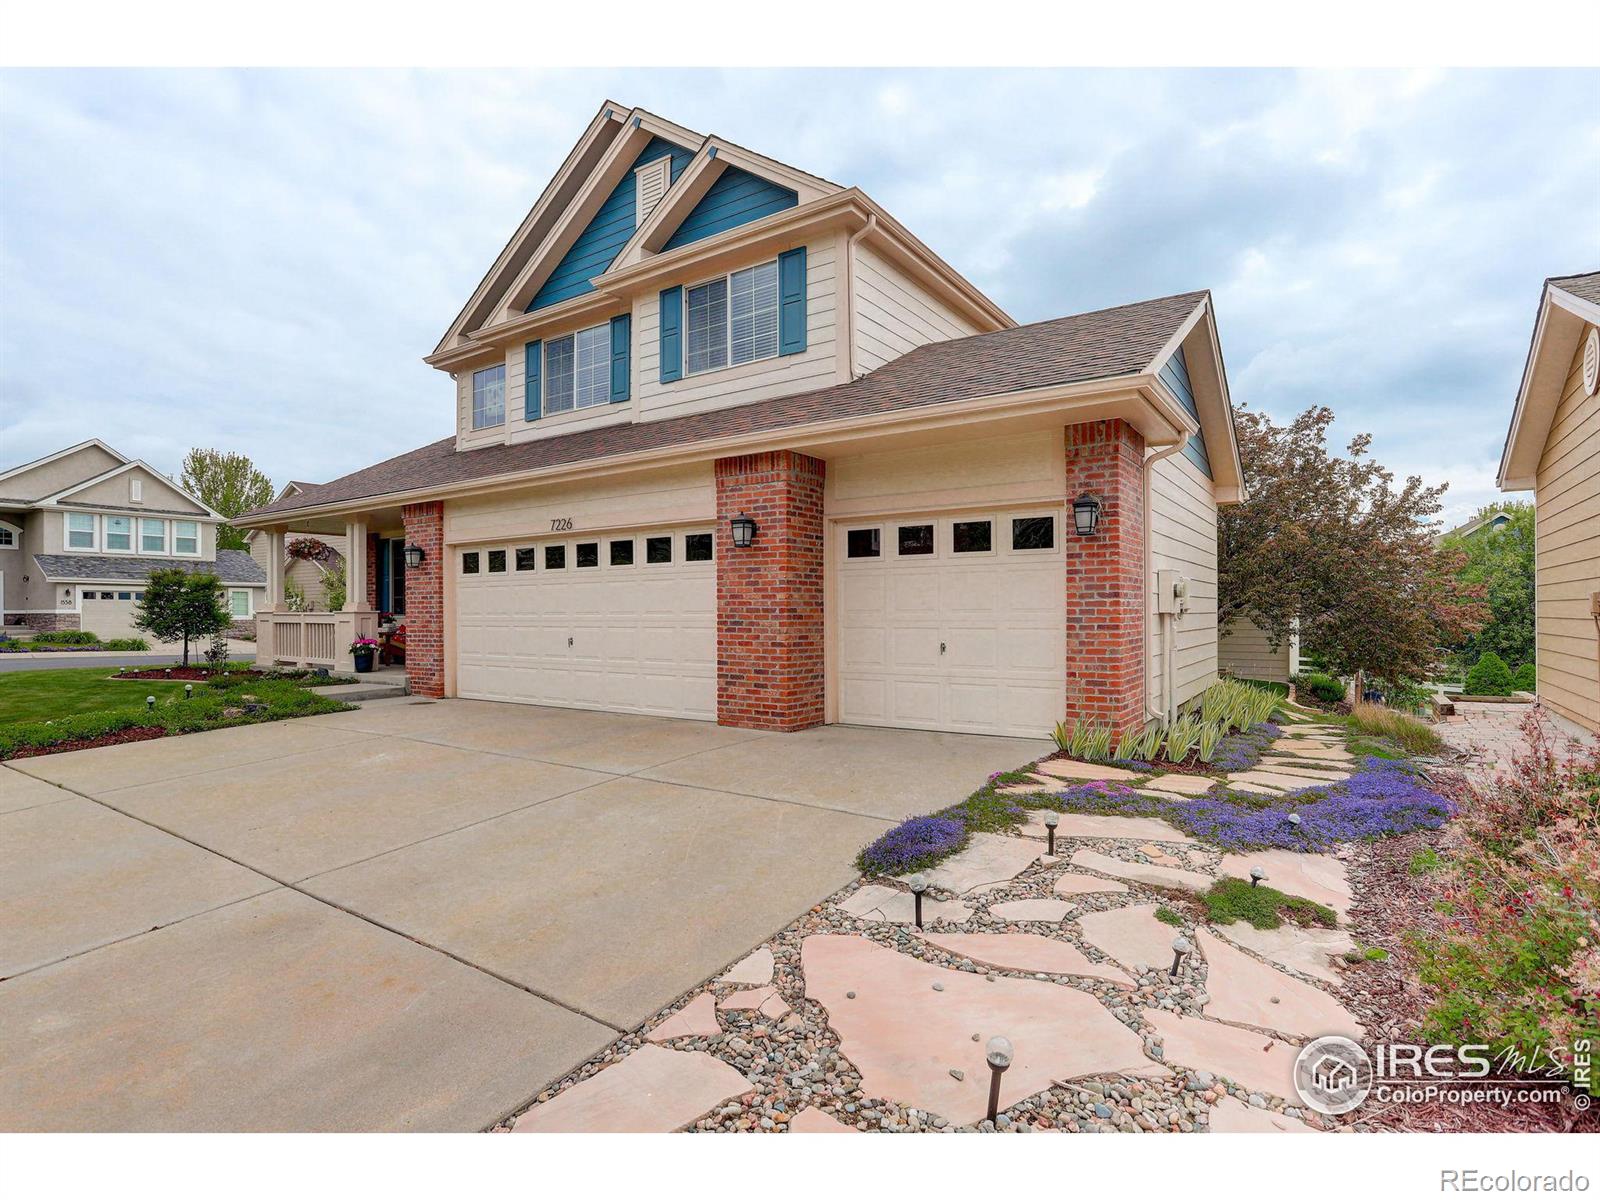 Report Image for 7226  Ranger Drive,Fort Collins, Colorado